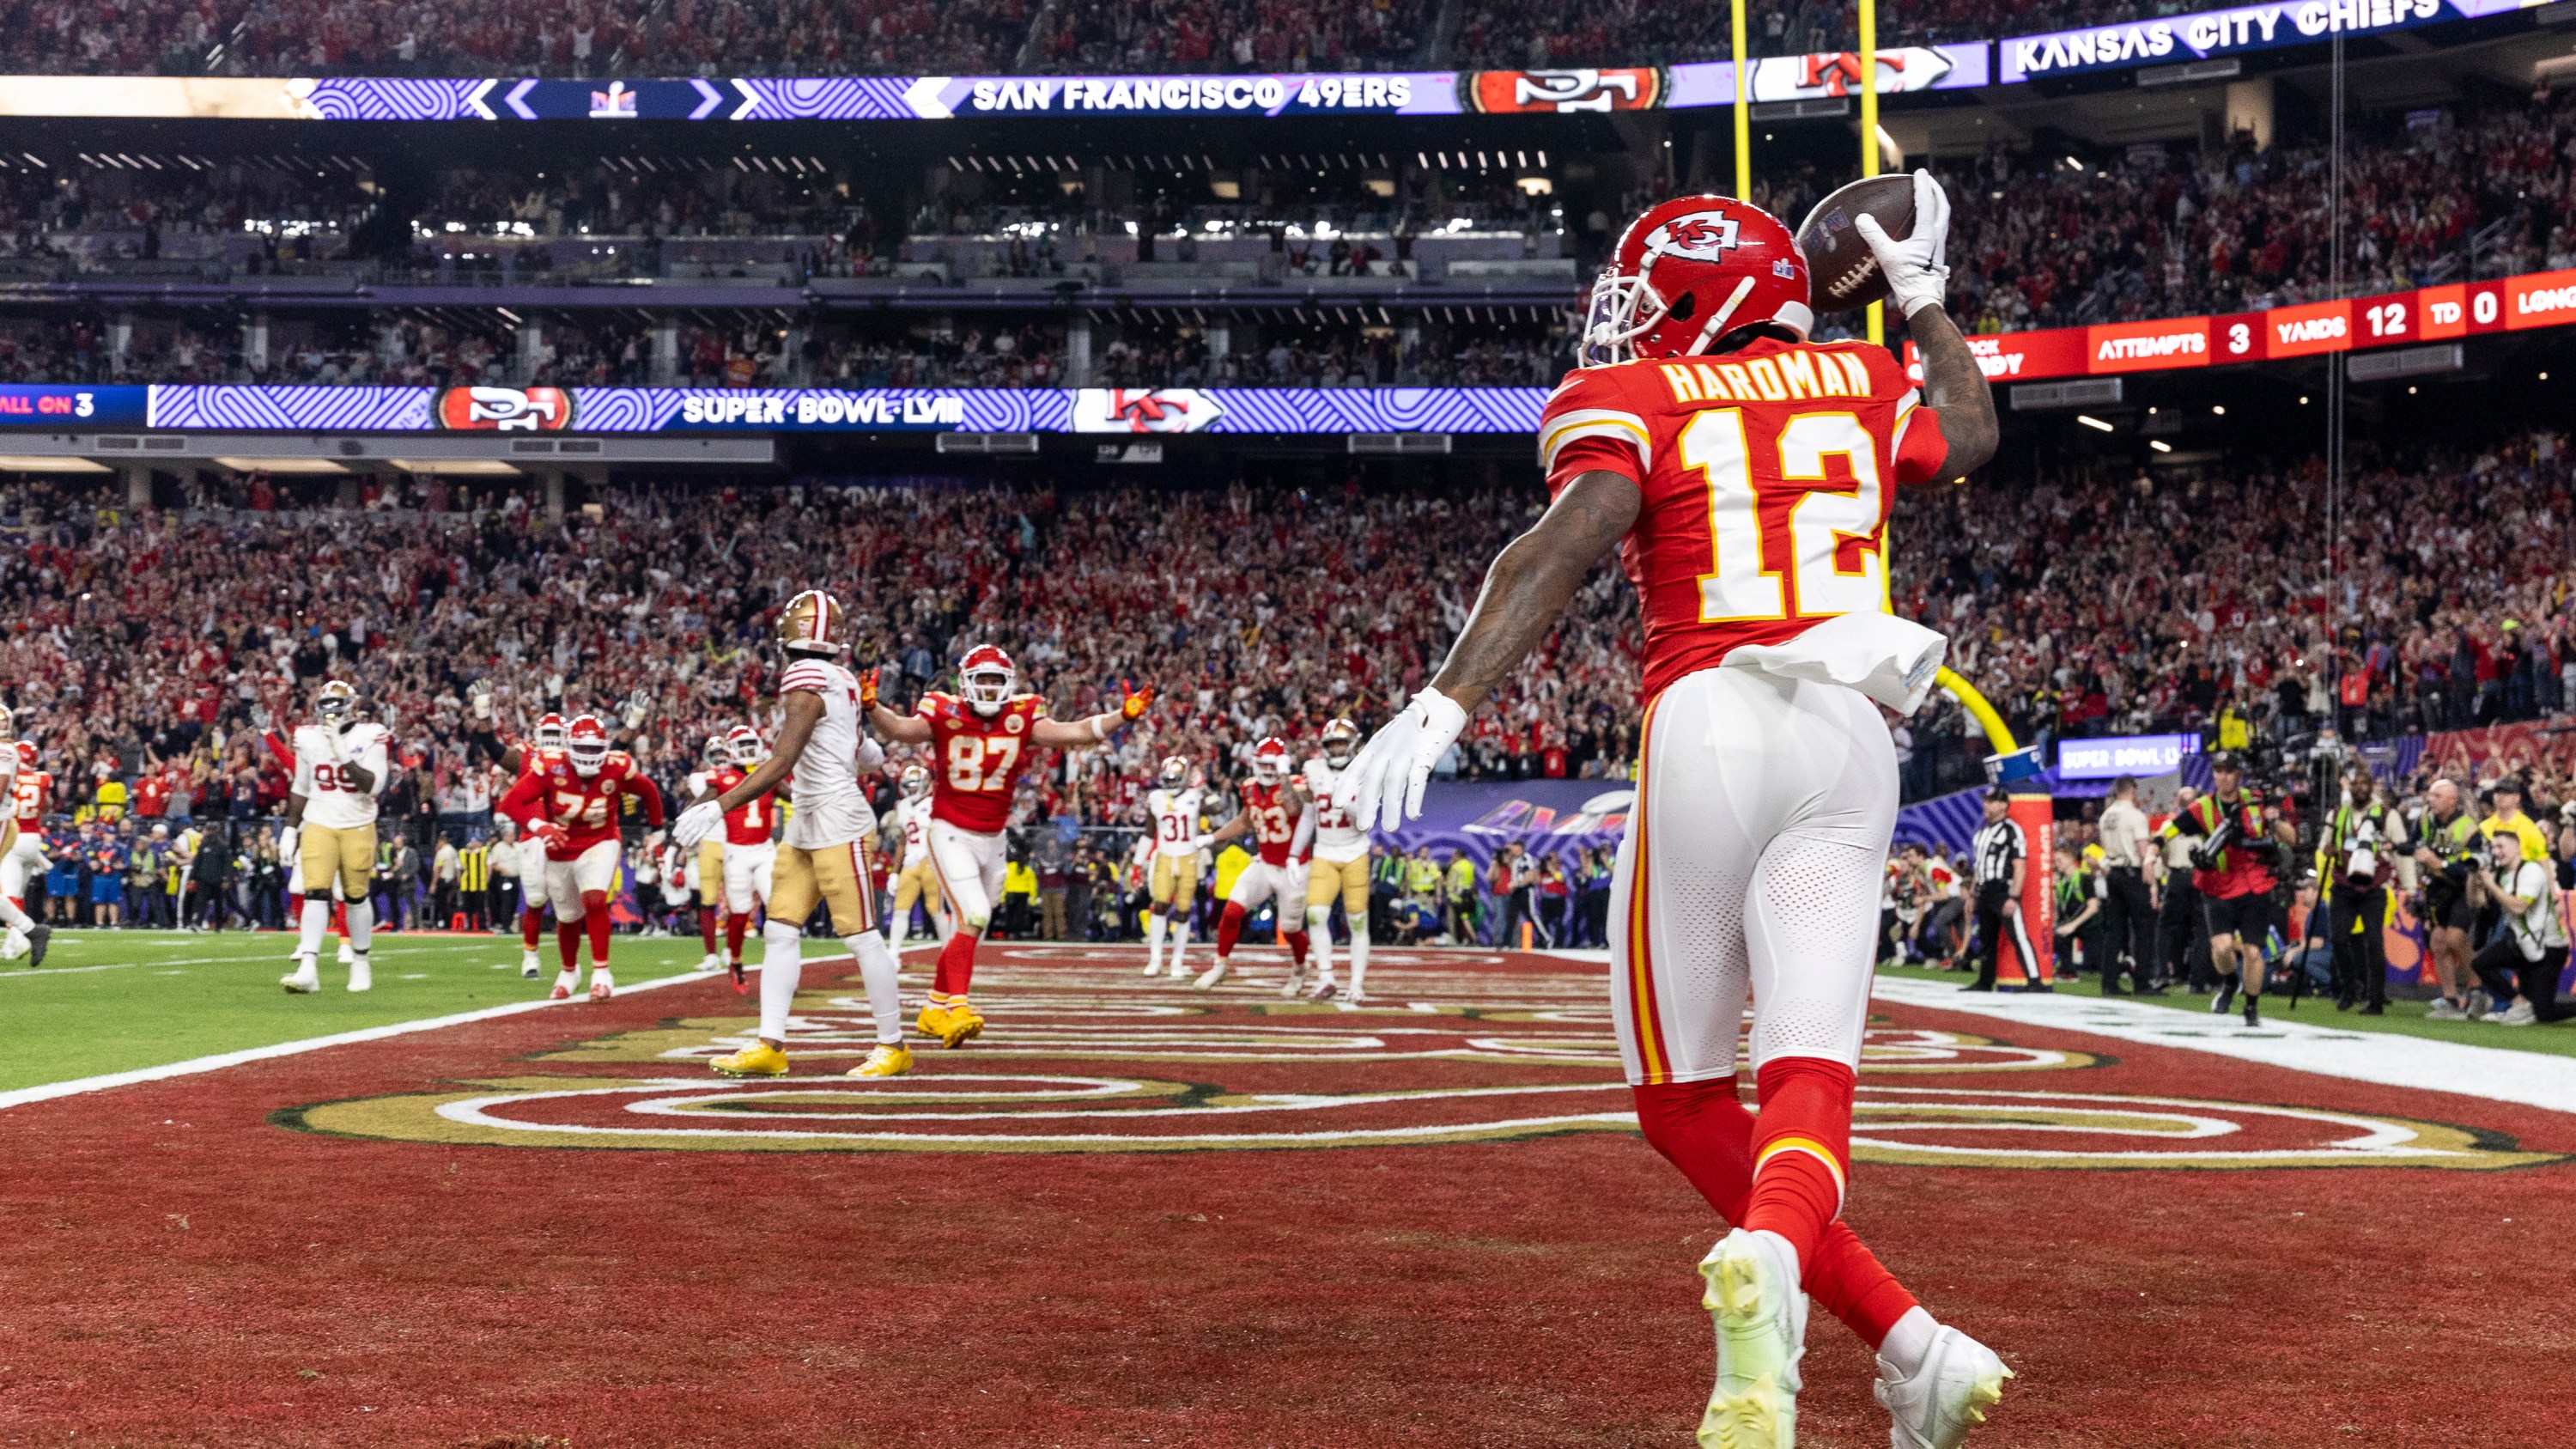 LAS VEGAS, NEVADA - FEBRUARY 11: Mecole Hardman Jr. #12 of the Kansas City Chiefs celebrates after scoring a touchdown in overtime to win during the NFL Super Bowl 58 football game between the San Francisco 49ers and the Kansas City Chiefs at Allegiant Stadium on February 11, 2024 in Las Vegas, Nevada. (Photo by Michael Owens/Getty Images)